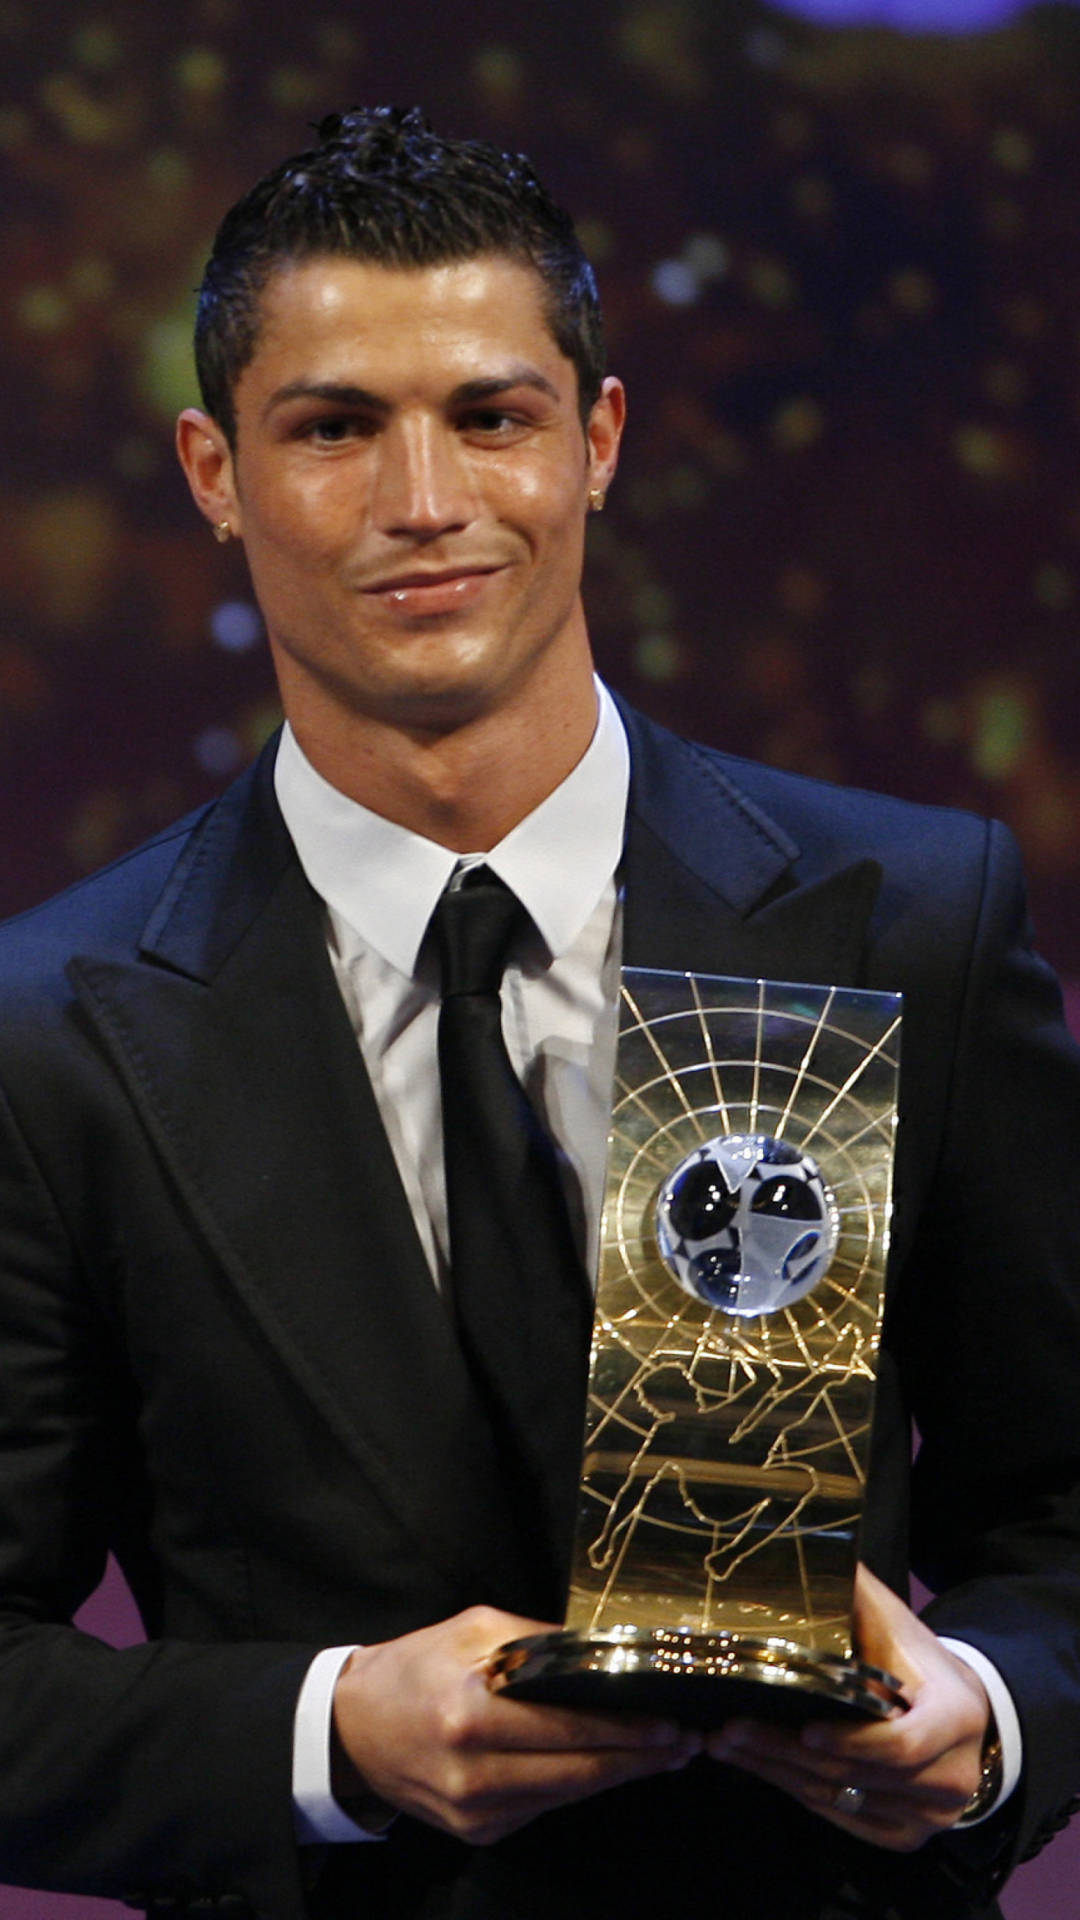 Download Fifa World Player Of The Year Ronaldo Iphone Wallpaper | Wallpapers .com